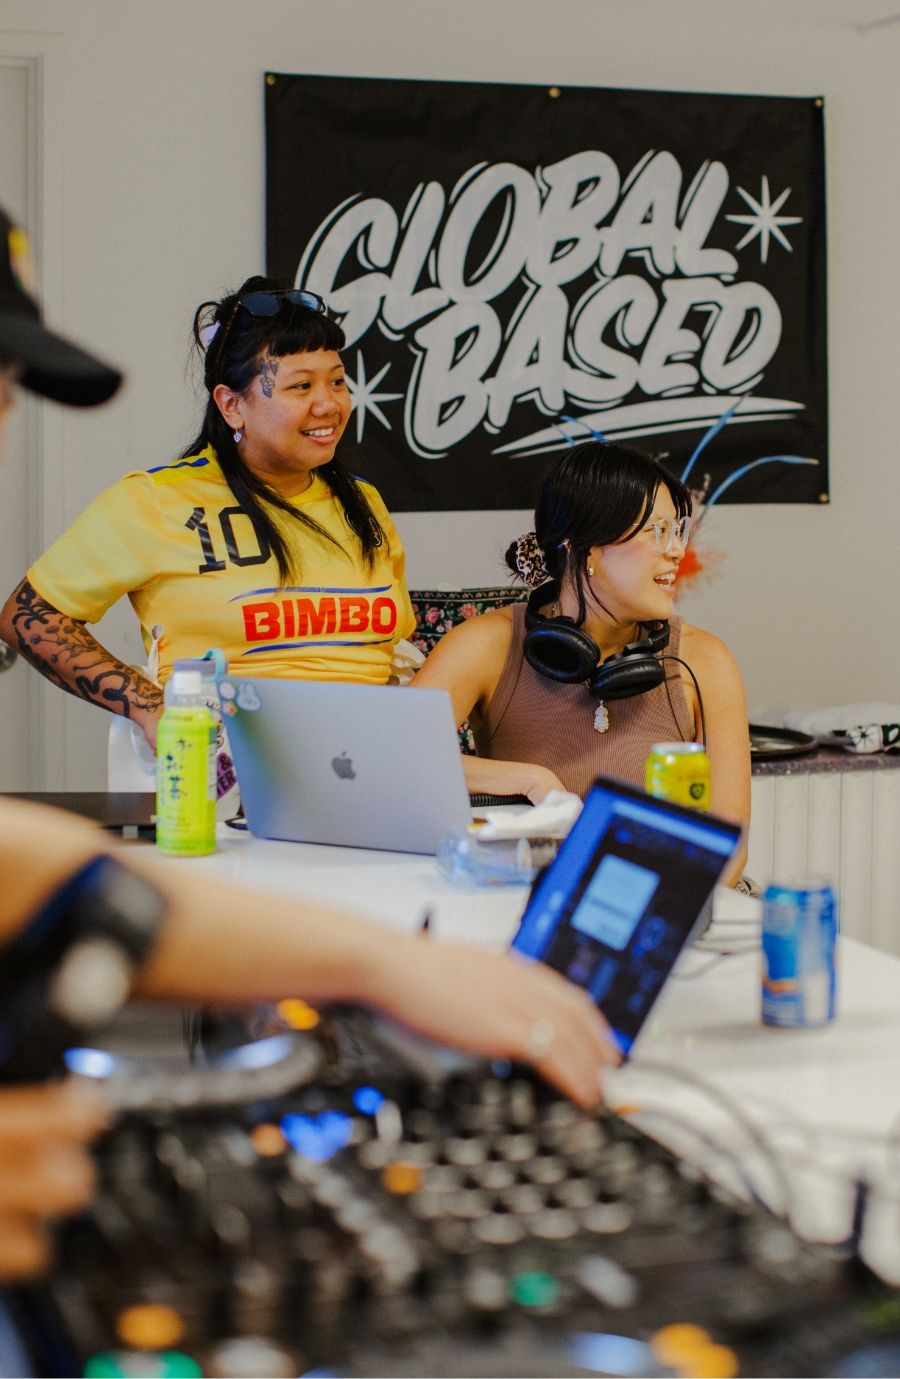 Two individuals sitting near DJ equipment and laptops in front of a "GLOBAL BASED" sign, with drinks and headphones on the table. One person is wearing a yellow top with "10 BIMBO" printed.